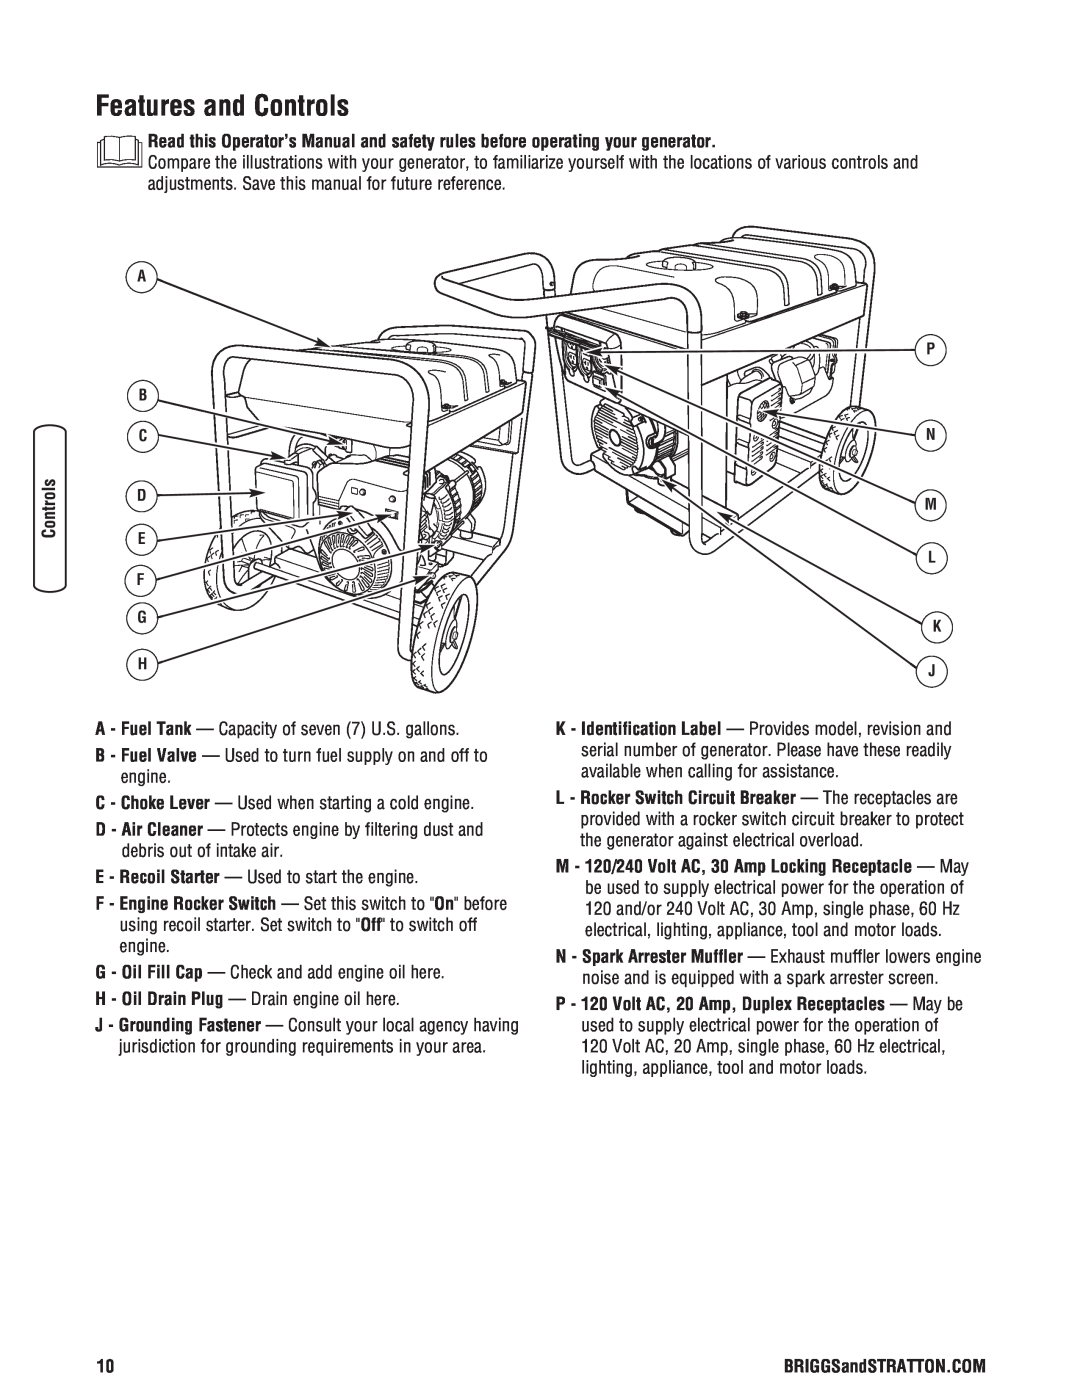 Briggs & Stratton Portable Generator manual Features and Controls, A - Fuel Tank - Capacity of seven 7 U.S. gallons 